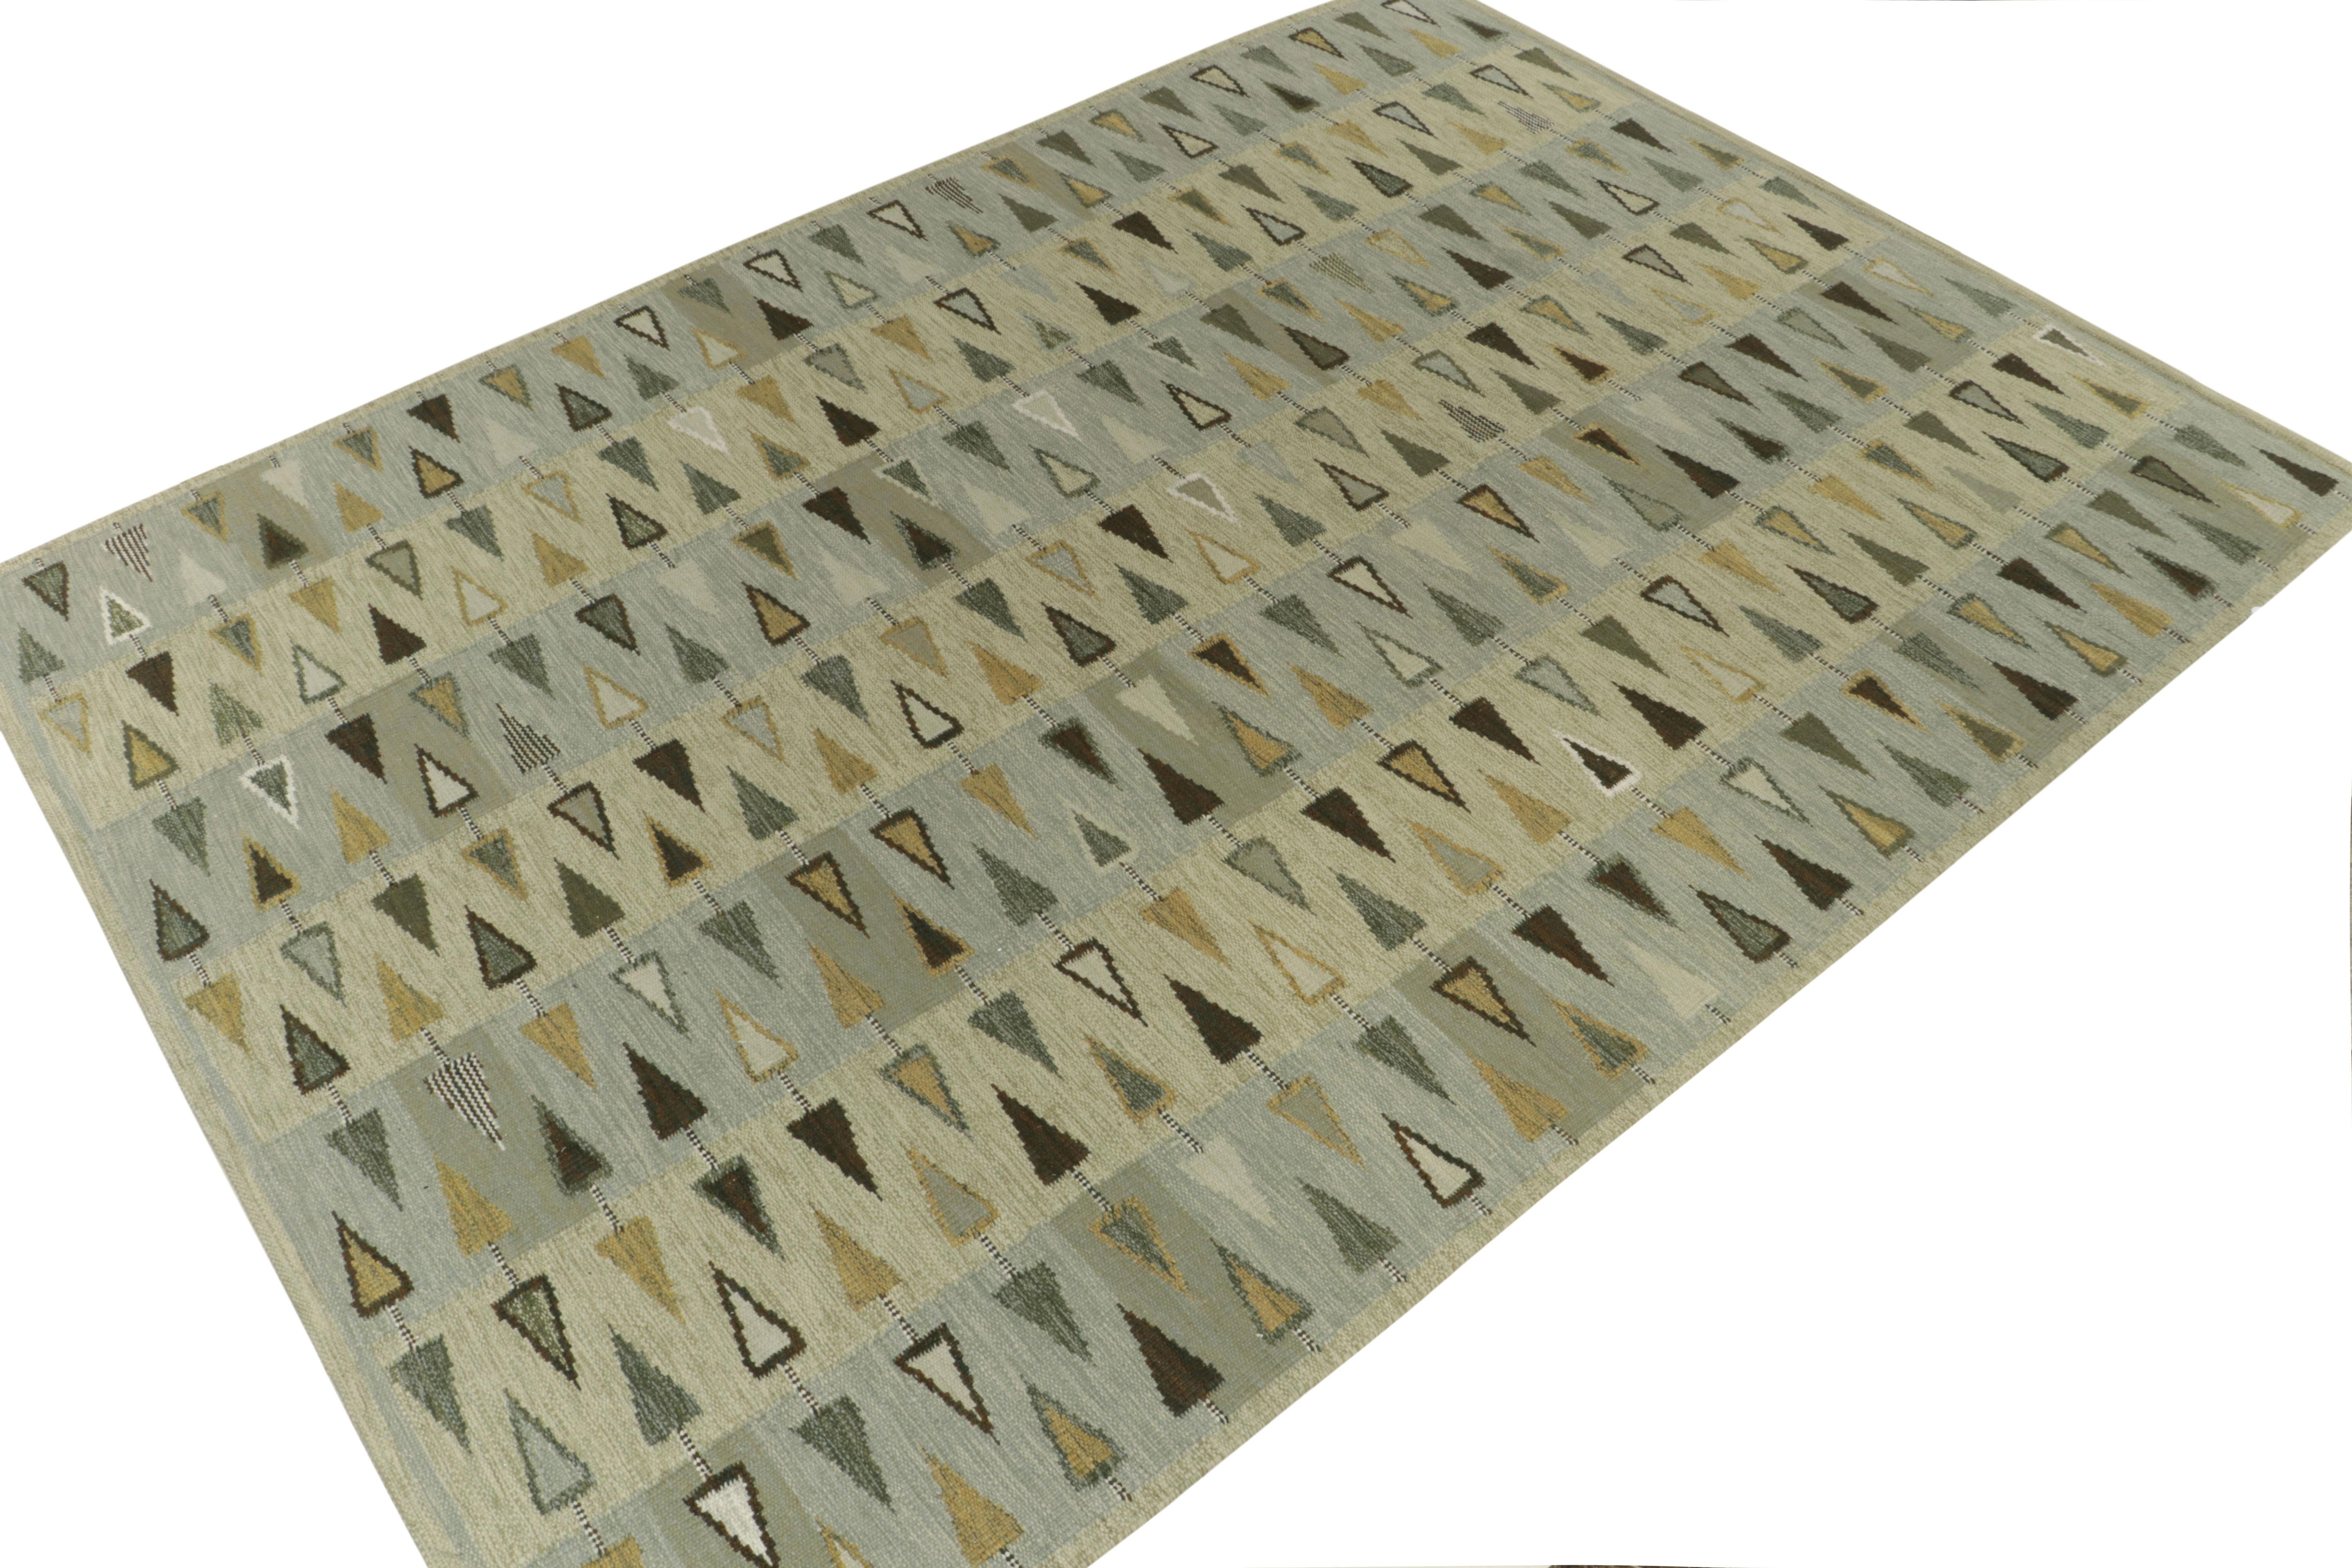 Reimagining Swedish sensibilities, this Scandinavian Kilim design enjoys a defined geometric pattern in gorgeous movement, exemplified in rich play of gold & gray tones alternating graciously for lavish take in contemporary style. Further enjoying